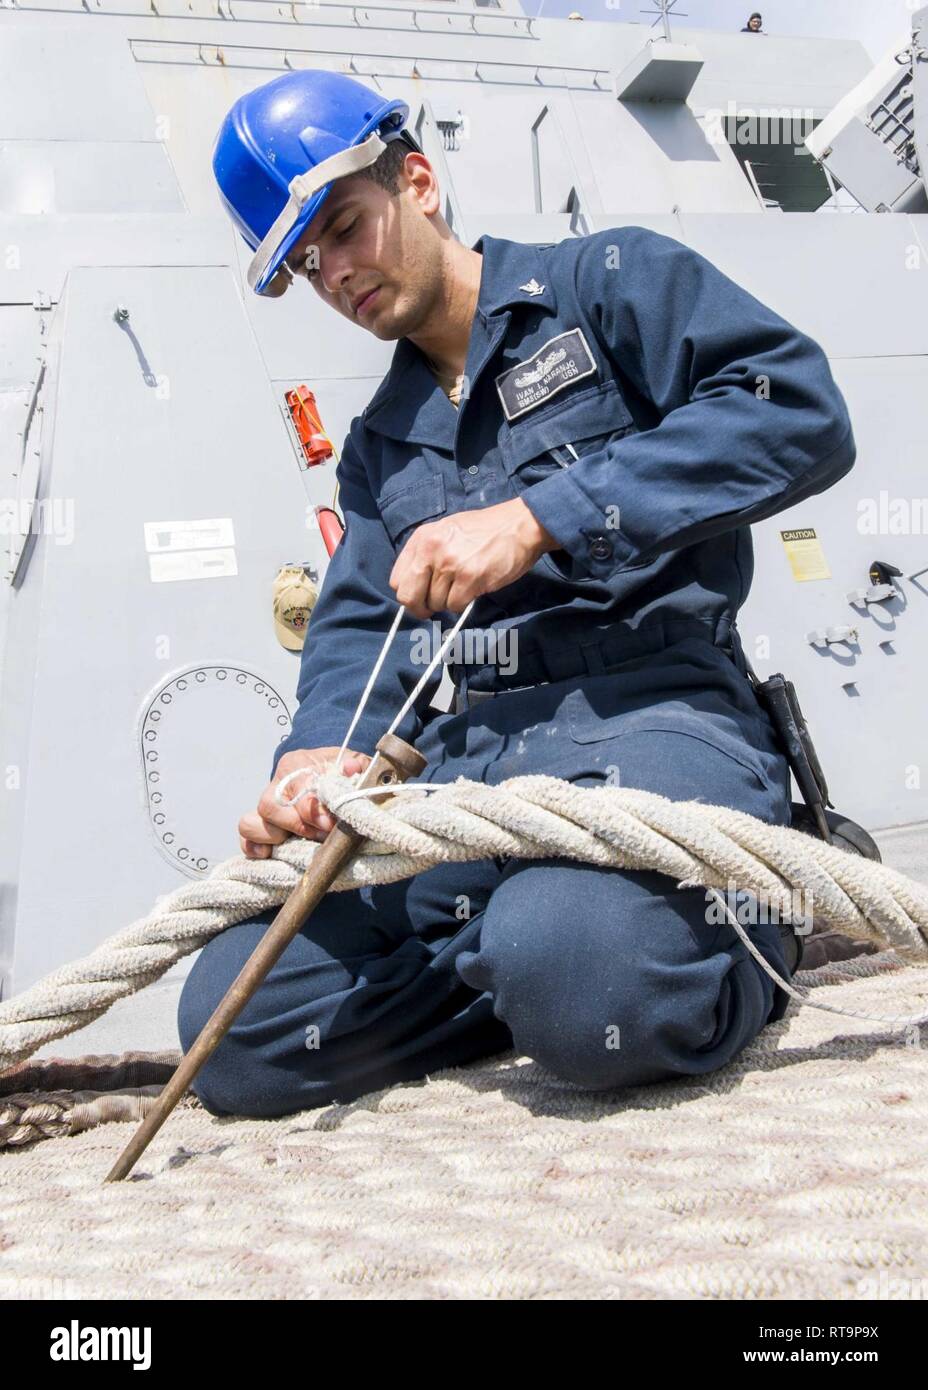 SINGAPORE (Jan. 31, 2019) Boatswain’s Mate 3rd Class Ivan Naranjo, from Chicago, repairs a mooring line on the forecastle aboard the San Antonio-class amphibious transport dock ship USS Anchorage (LPD 23) while on a deployment of the Essex Amphibious Ready Group (ARG) and 13th Marine Expeditionary Unit (MEU). The Essex ARG/13th MEU is a capable and lethal Navy-Marine Corps team deployed to the 7th fleet area of operations to support regional stability, reassure partners and allies and maintain a presence postured to respond to any crisis ranging from humanitarian assistance to contingency oper Stock Photo